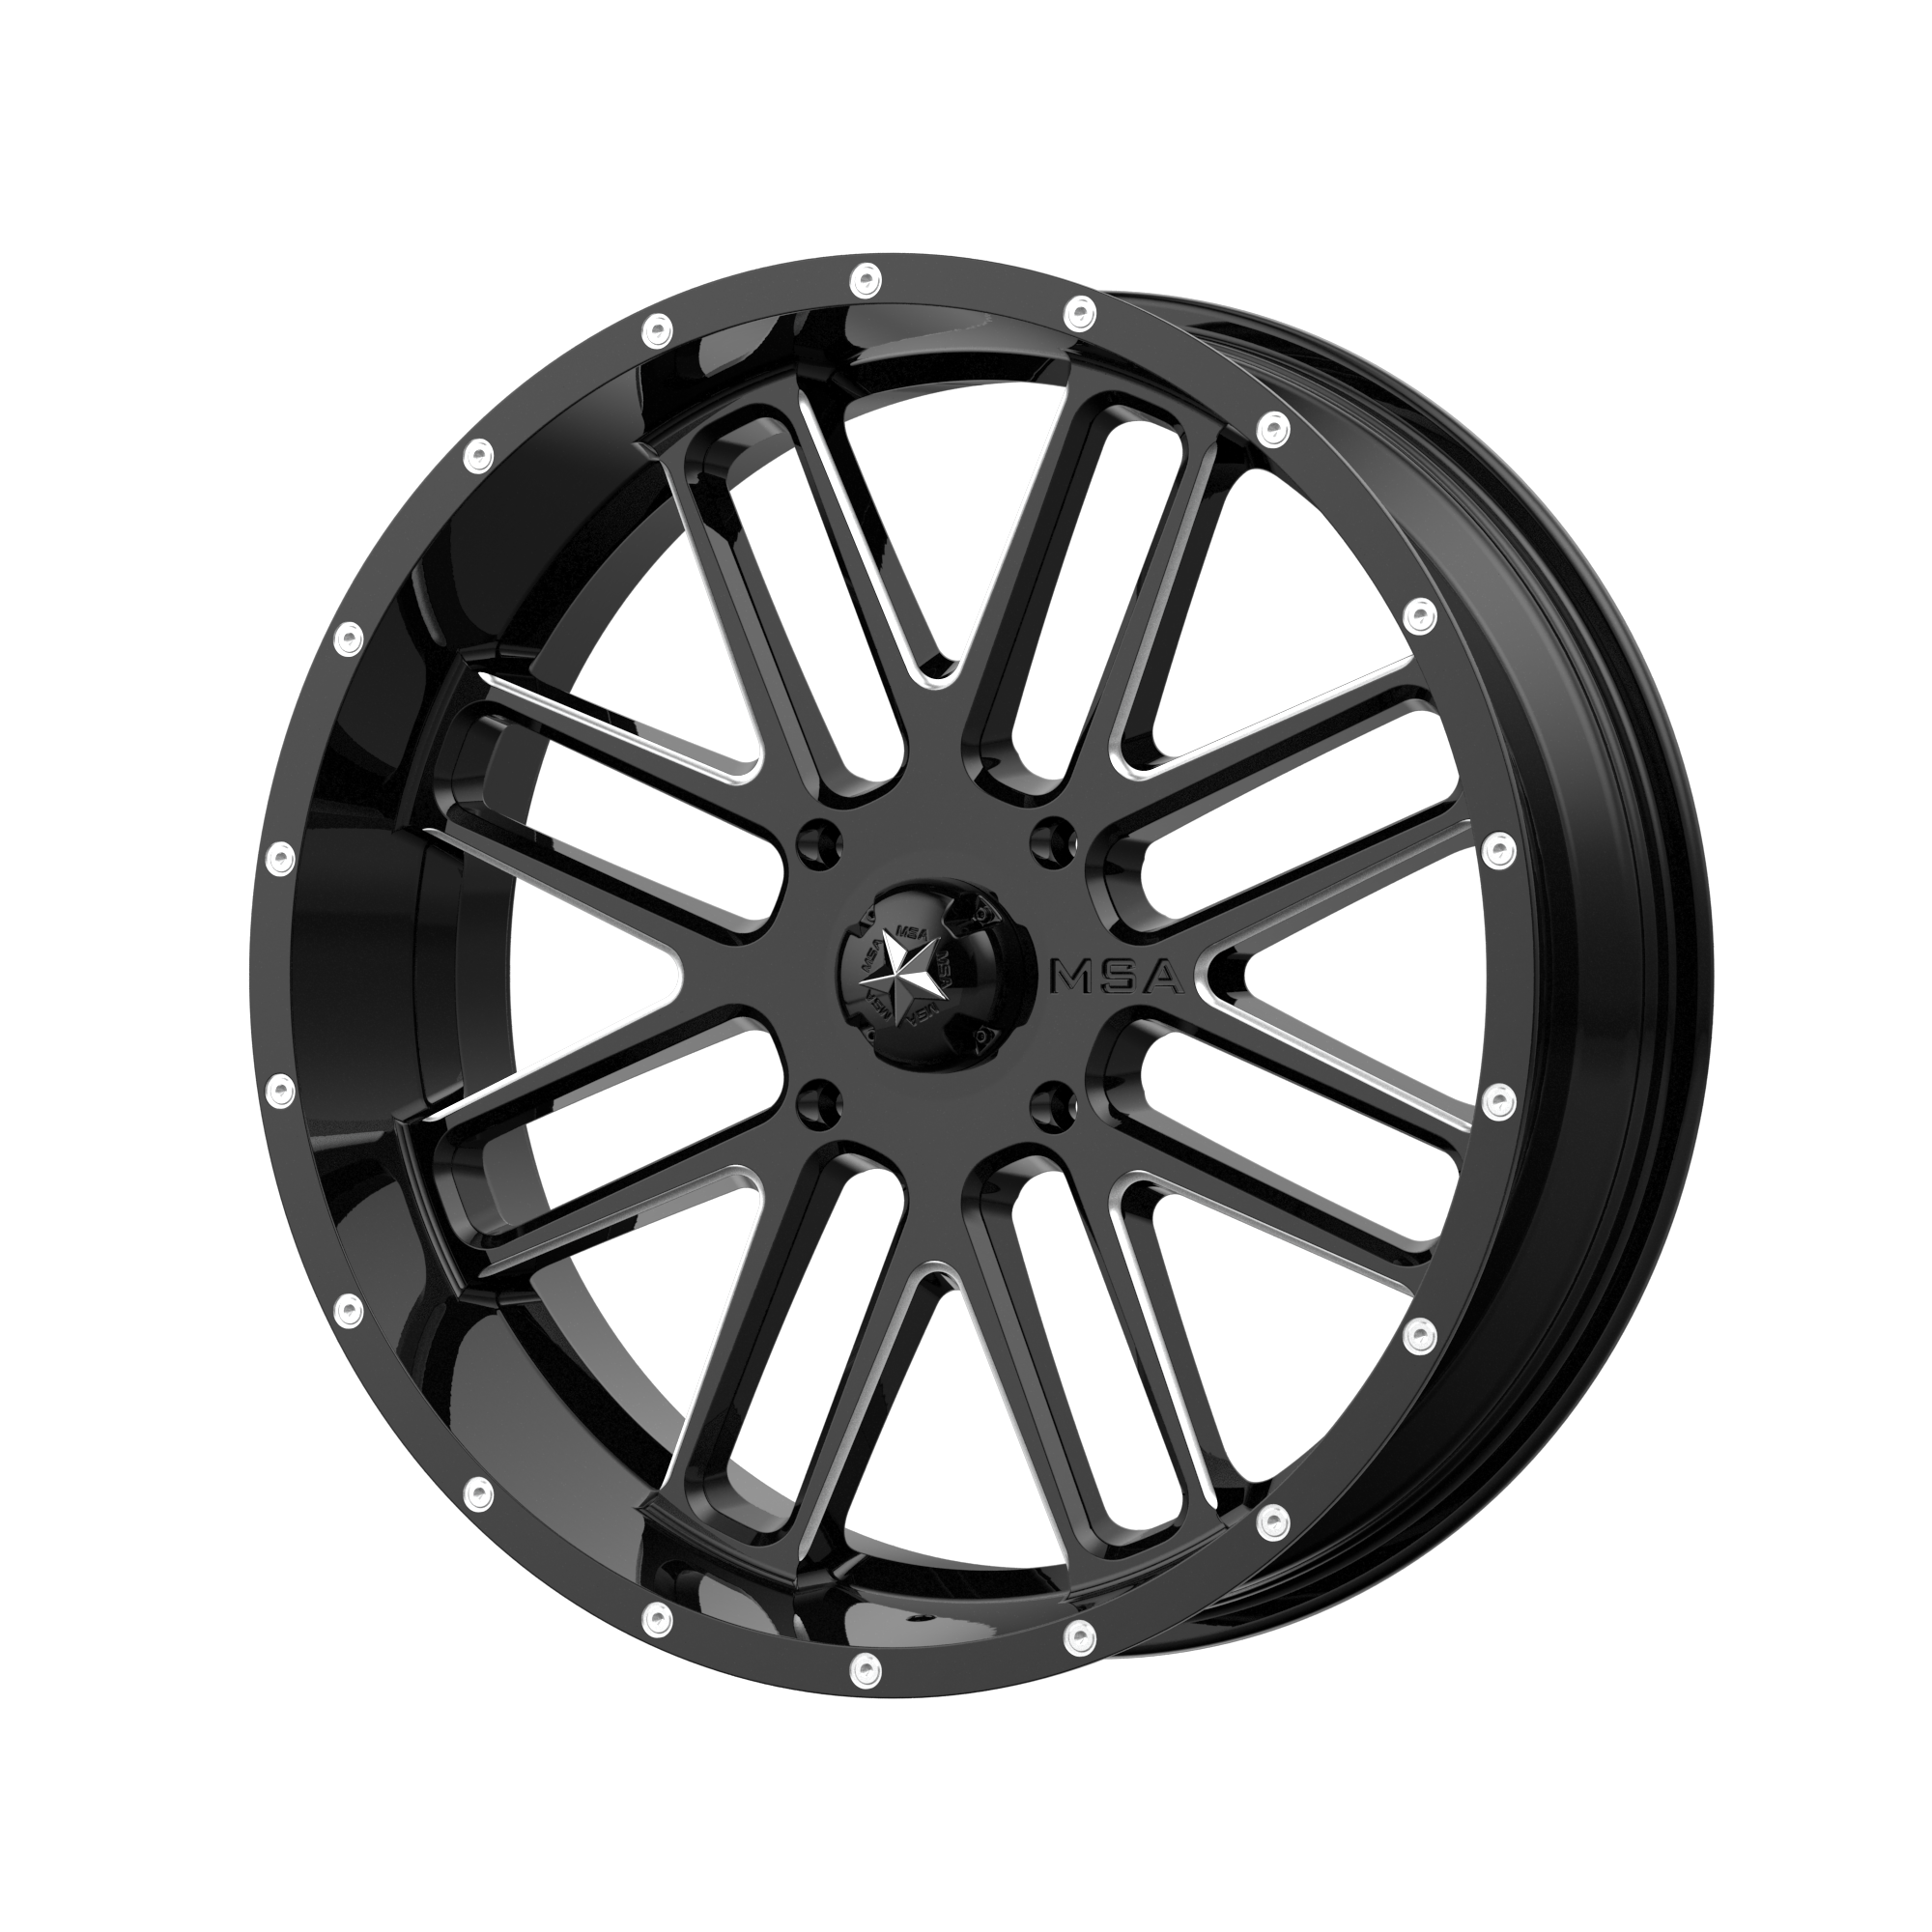 BANDIT 18x7 4x156.00 GLOSS BLACK MILLED (0 mm) - Tires and Engine Performance